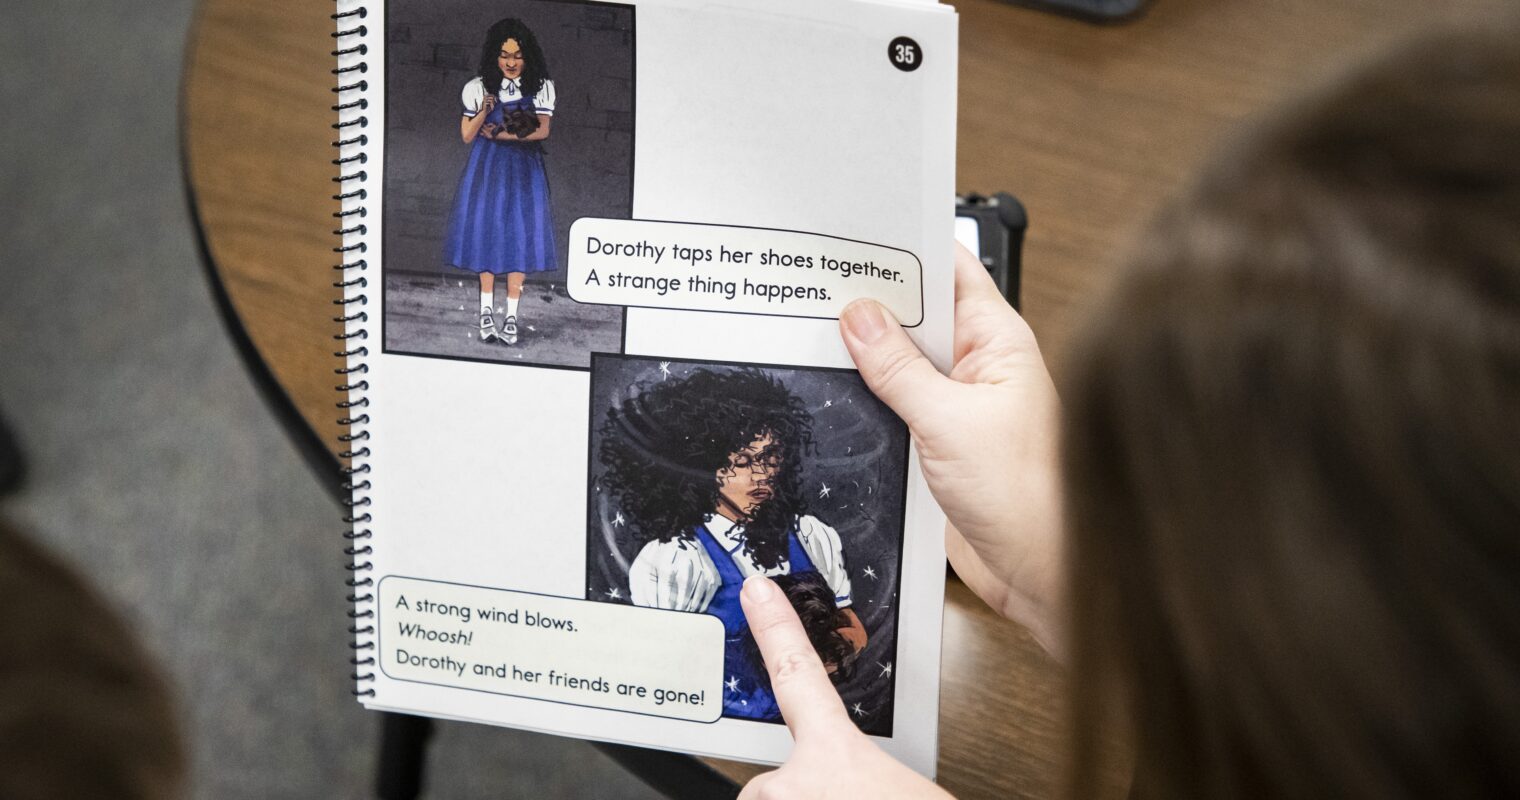 A person pointing to the page of a book in a classroom, with the book showing 2 pictures of Dorothy from The Wizard of Oz and text overlay that reads, "Dorothy taps her shoes together. A strange thing happens. A strong wind blows. Whoosh! Dorothy and her friends are gone!"